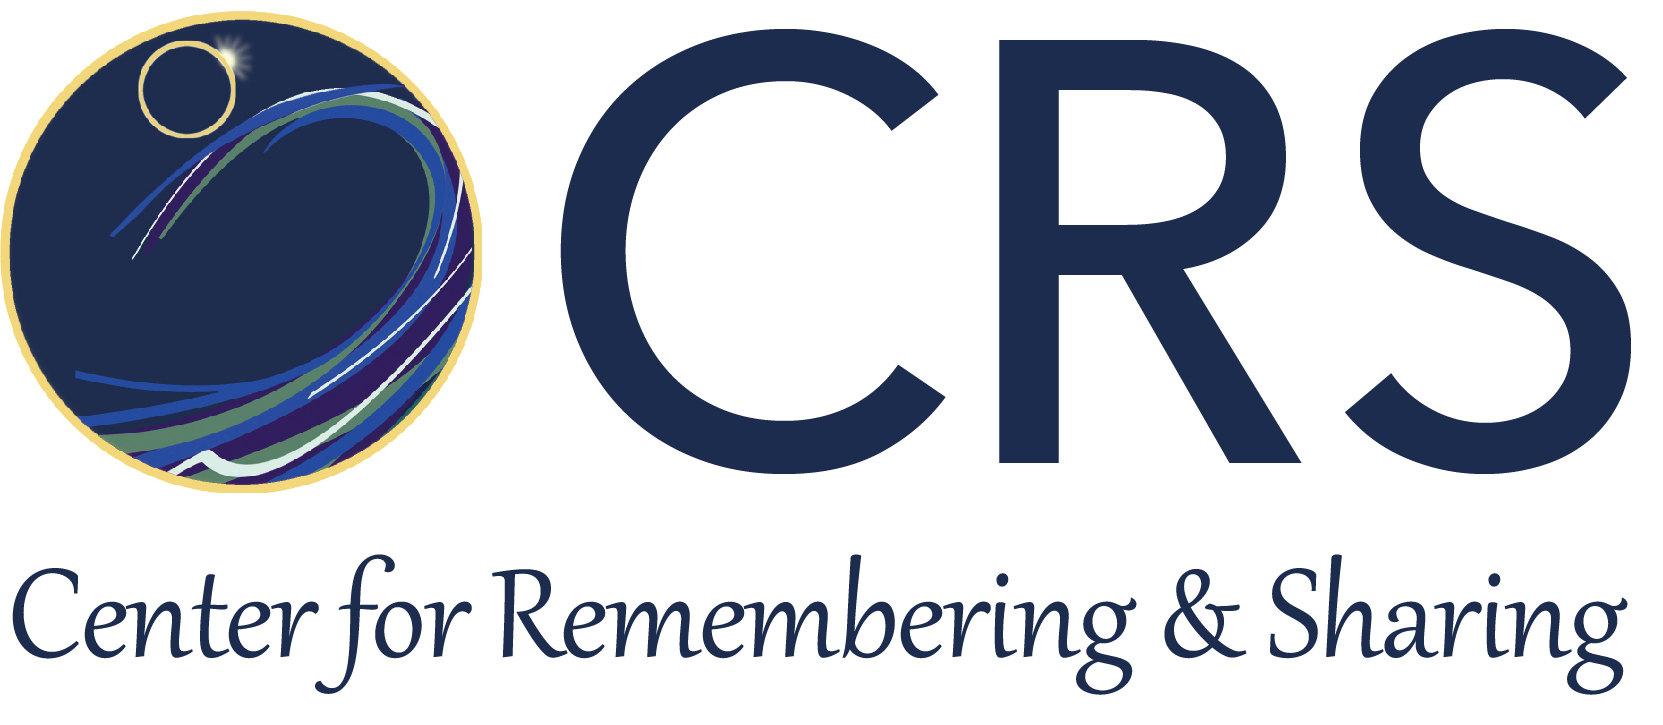 CRS (Center for Remembering & Sharing)